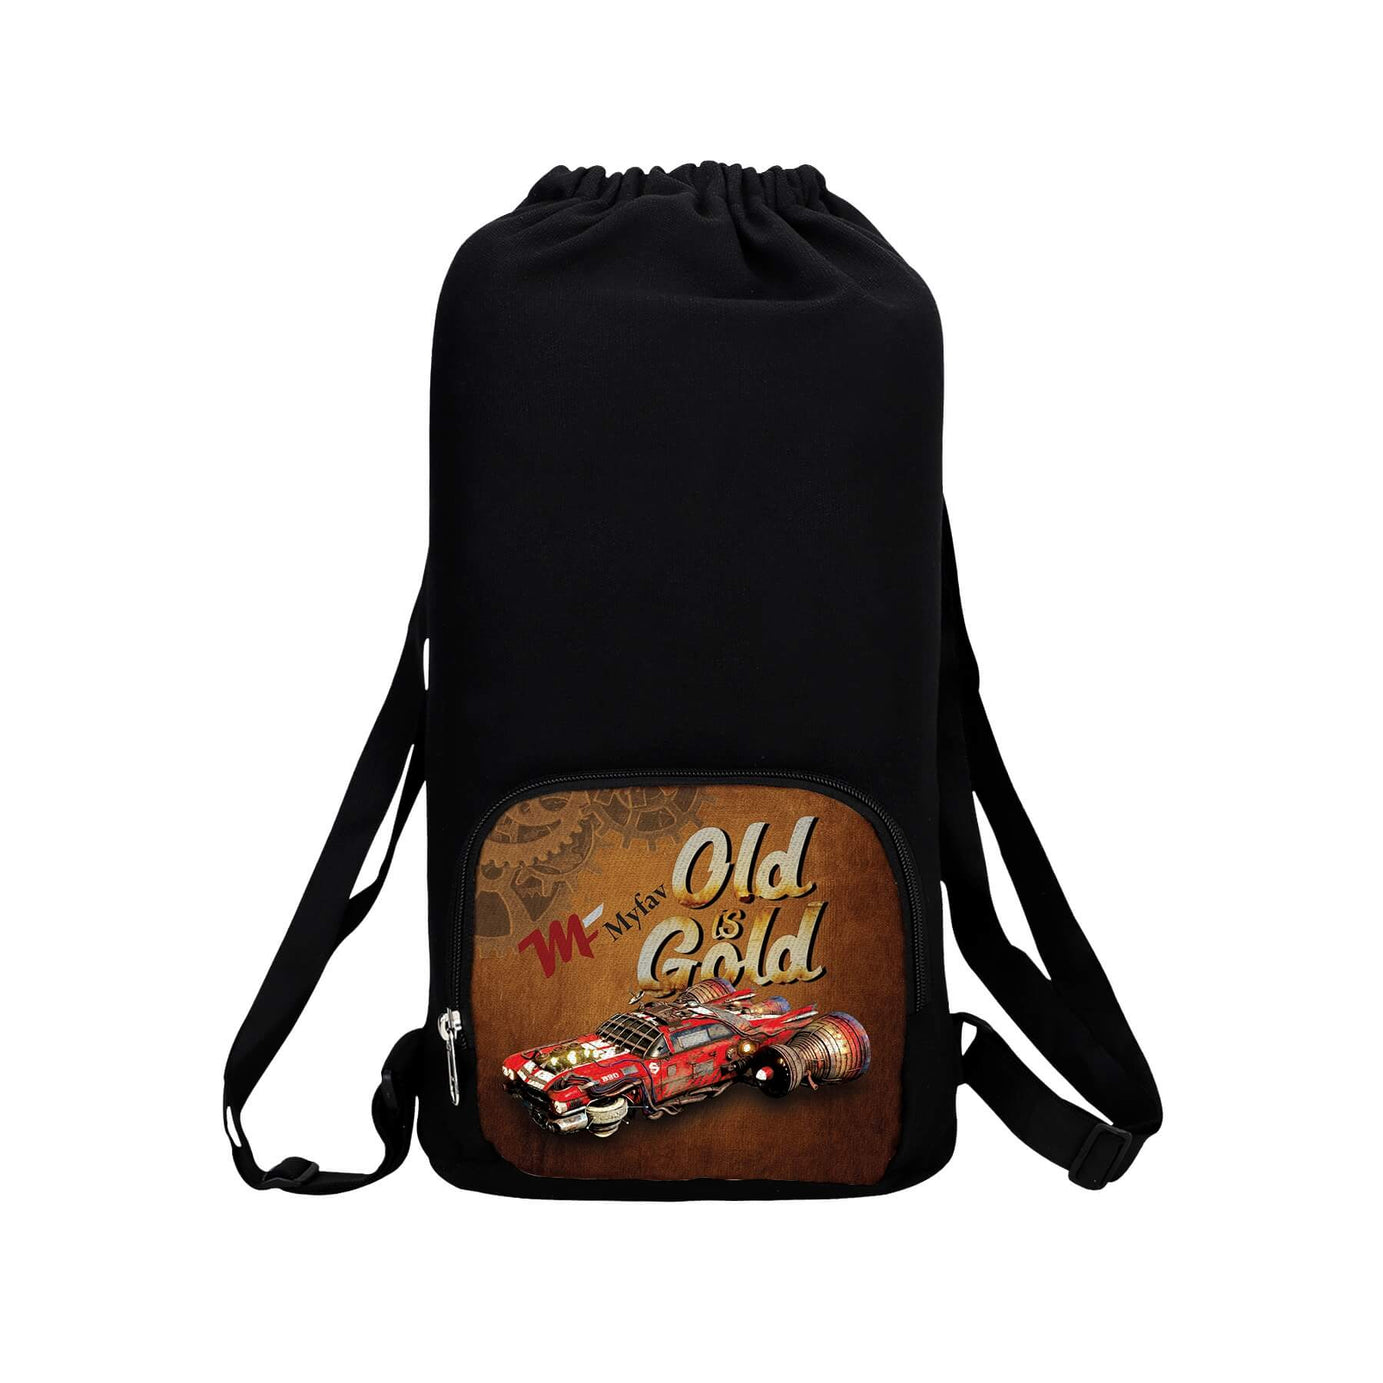 My Fav Old is Gold Print Cotton Canvas Tution Backpack / Exam Bag For Boys / Girls